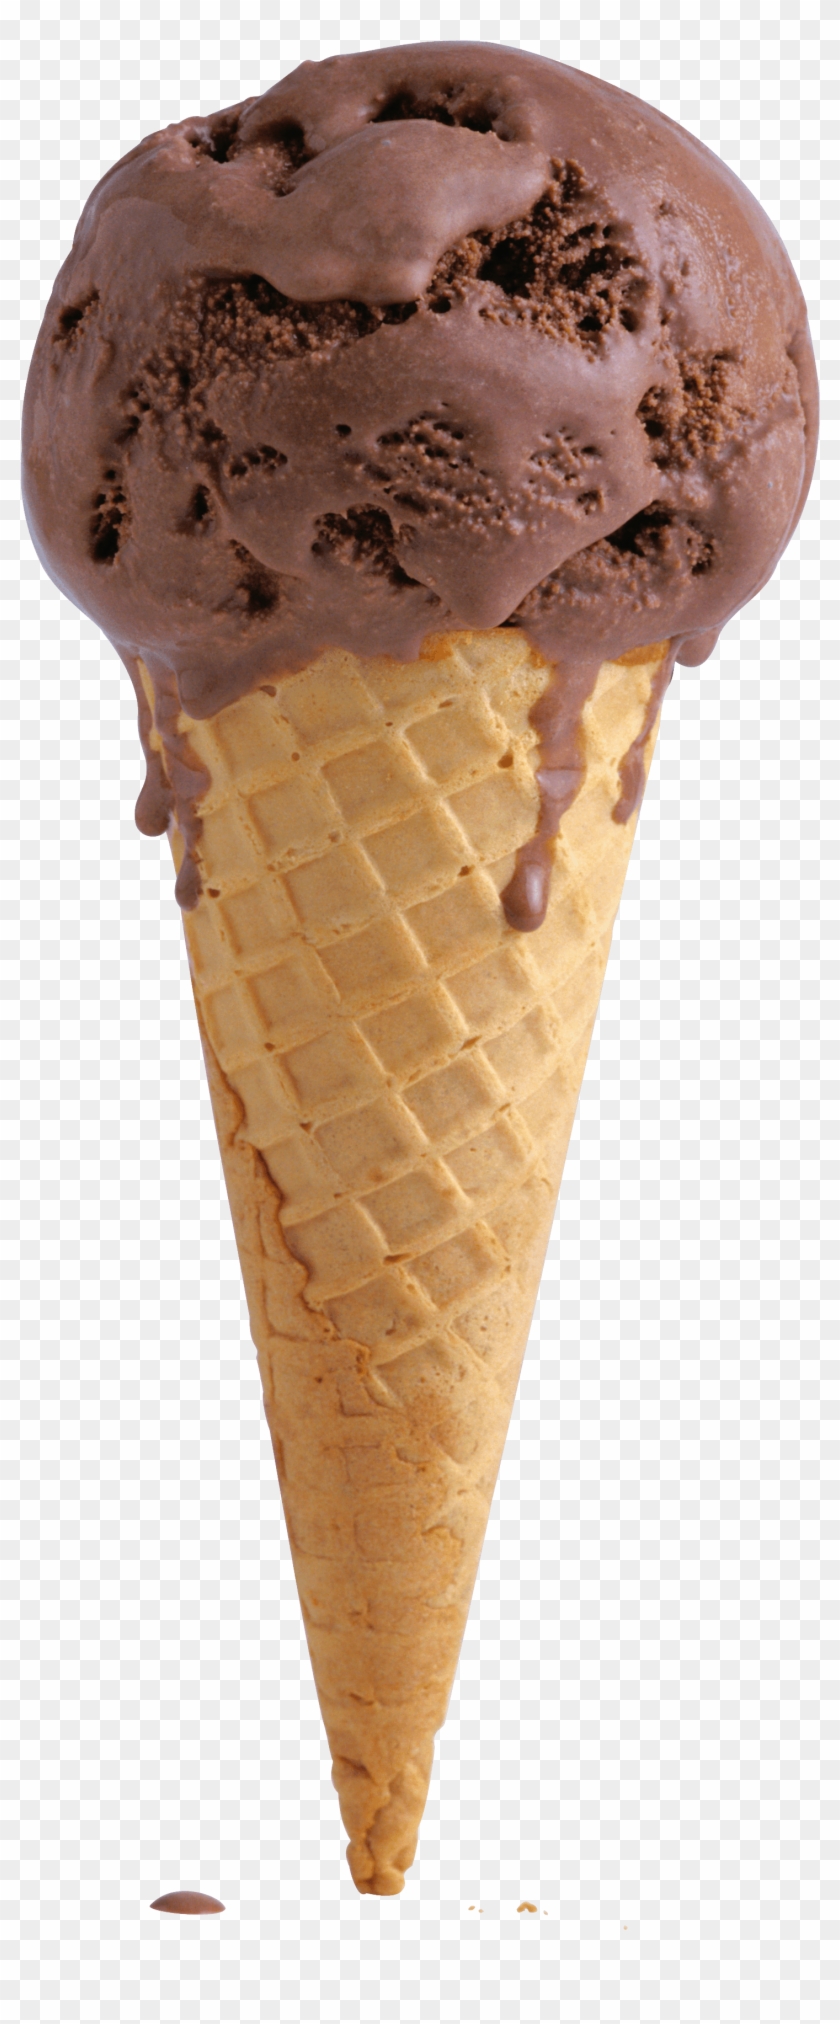 Chocolate Ice Cream Png Image Png Image - Ice Cream Cone Png #1084831